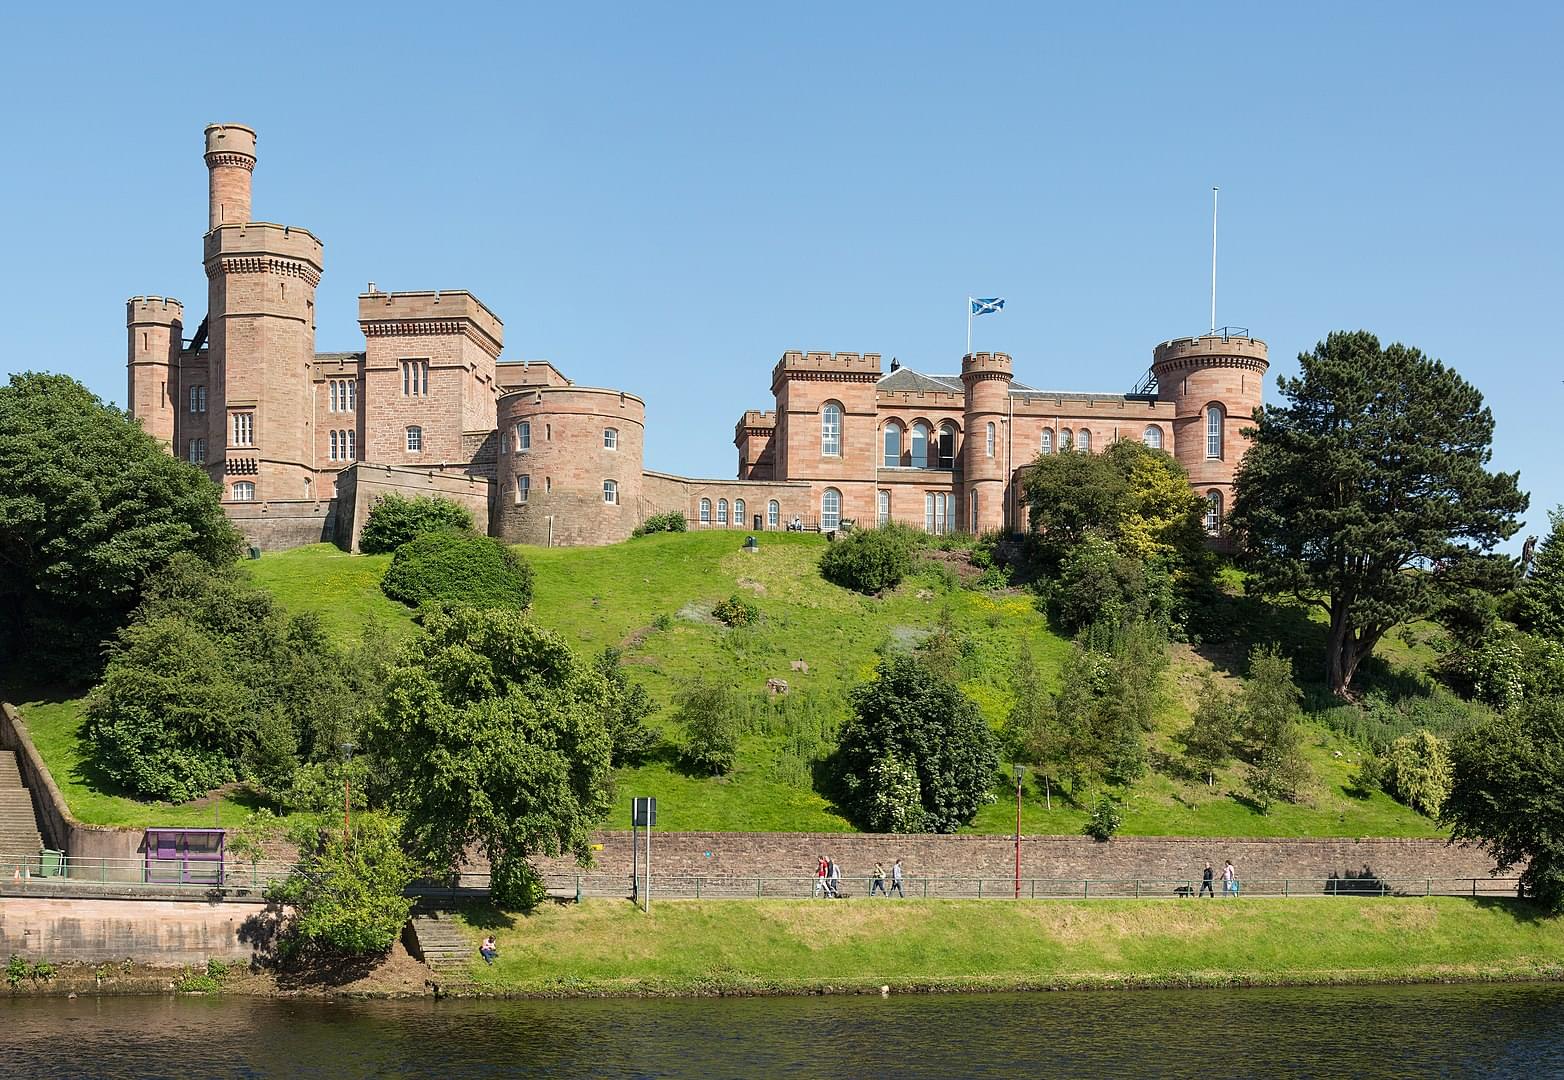 Inverness Castle Overview